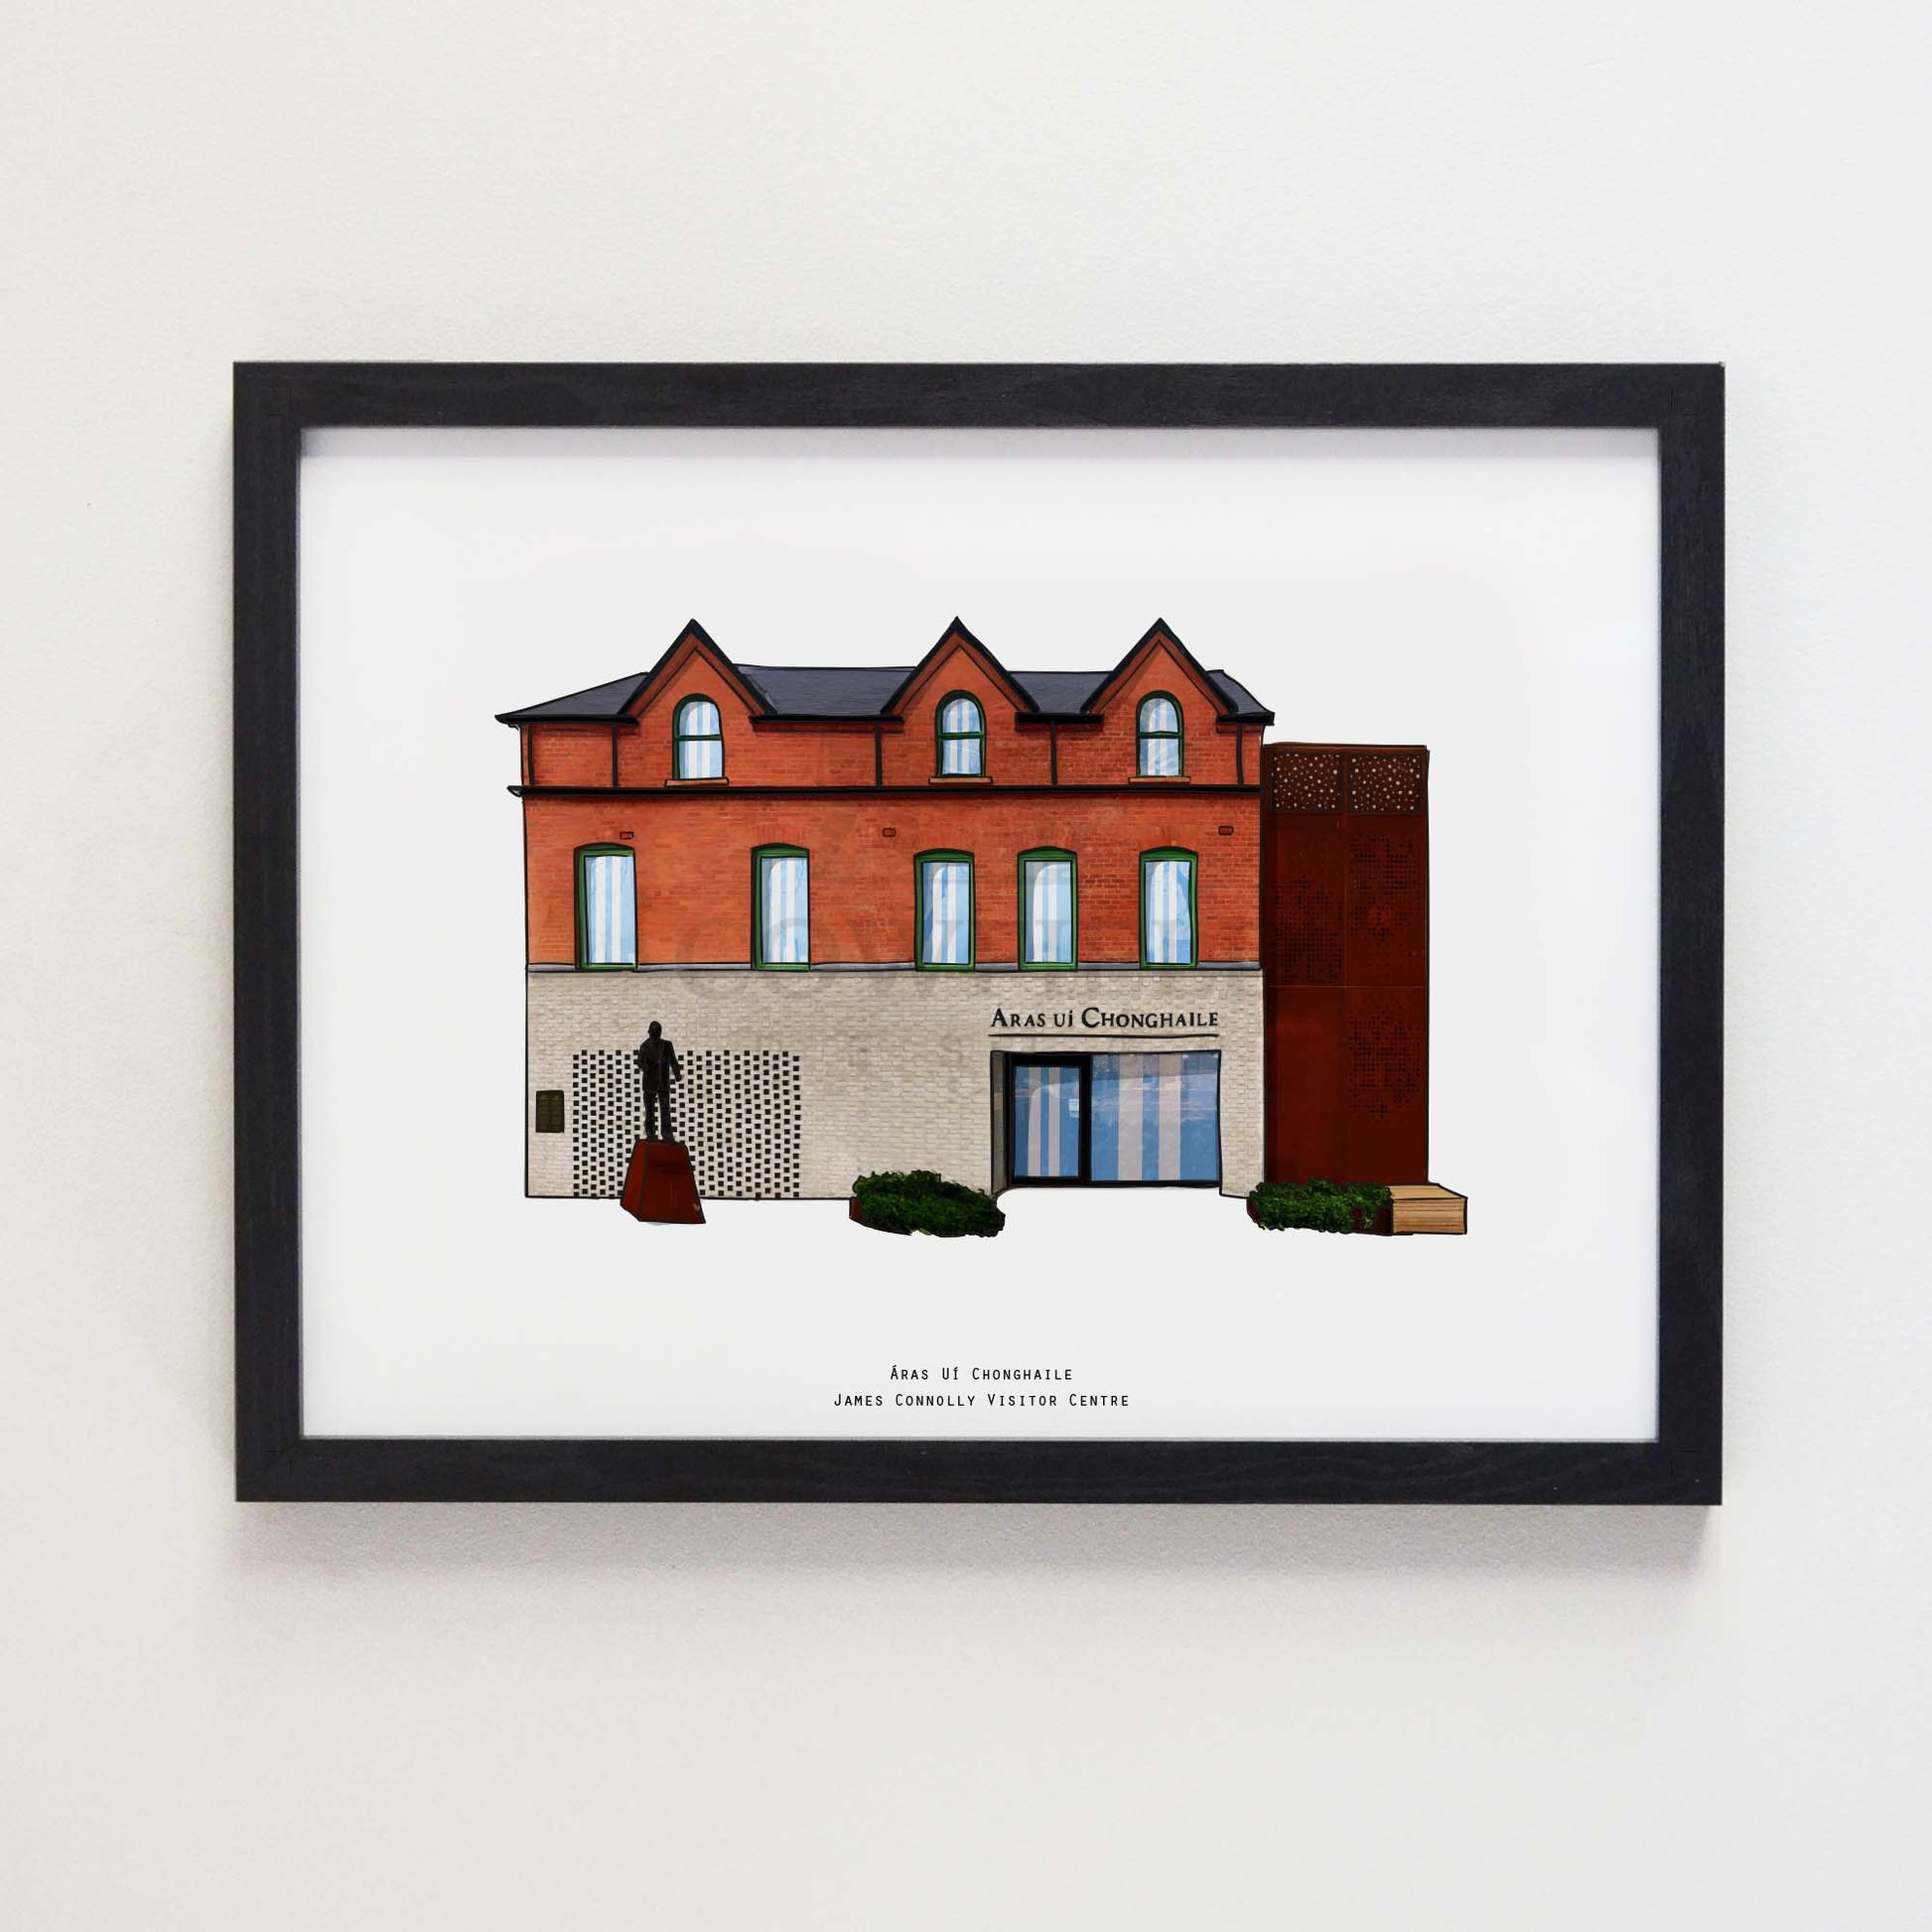 James Connolly Visitor Centre 40x30 Requested Pubs 2nd